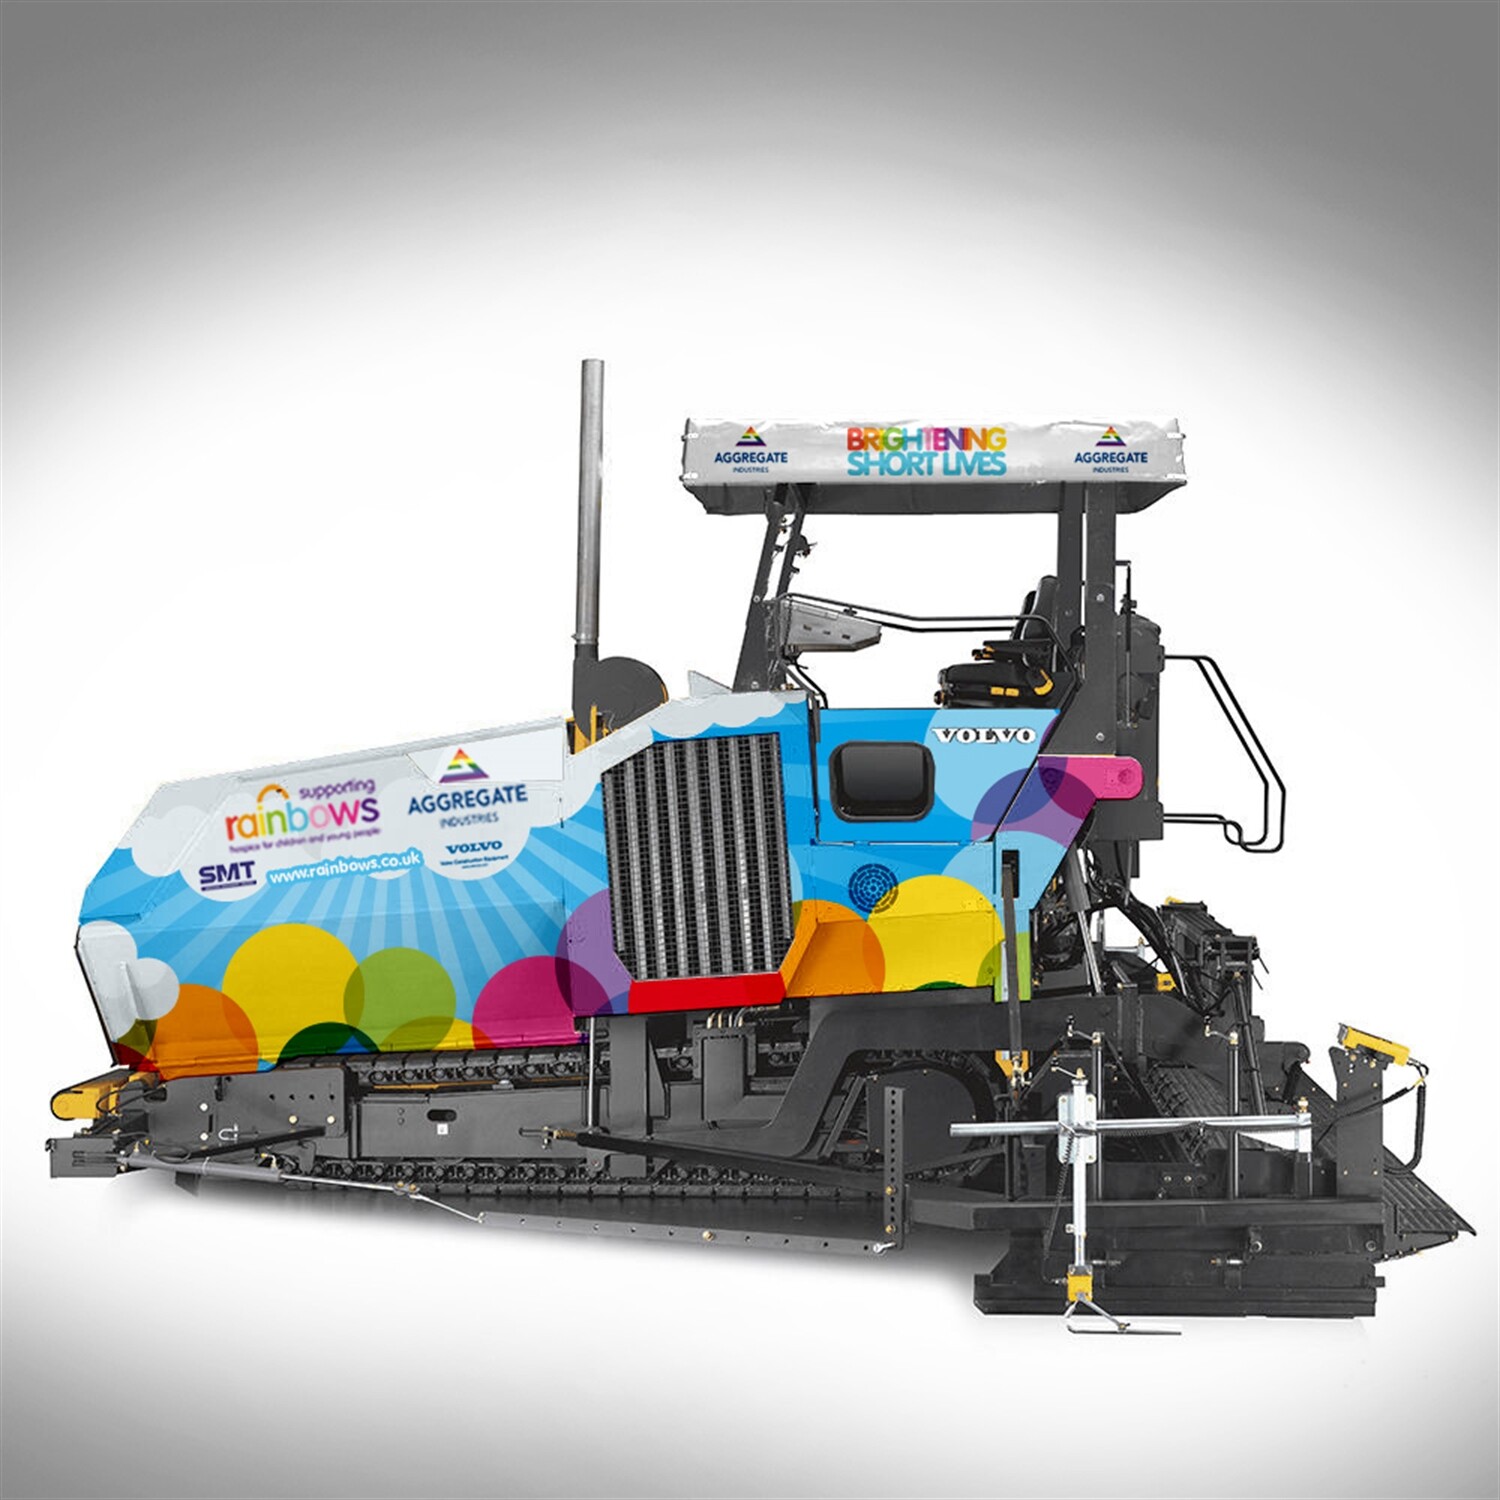 Aggregate Industries brings technicolour cheer to local childrens hospice with new rainbow paver